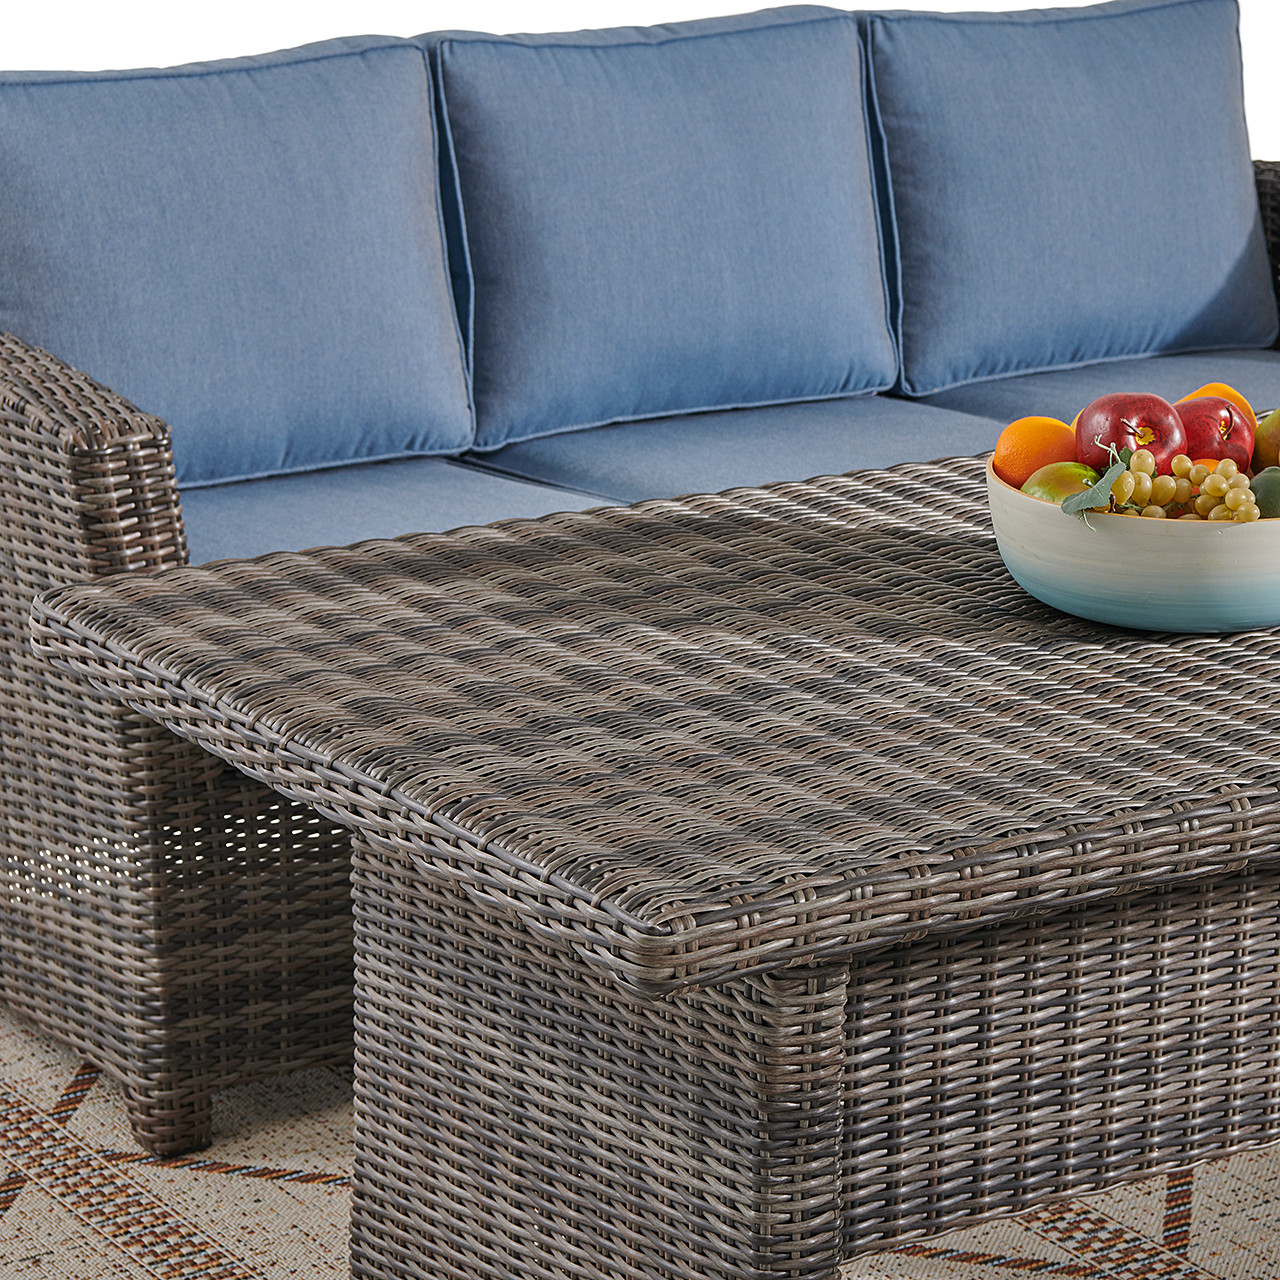 Venice Silver Oak Outdoor Wicker with Cushions 3 Piece Swivel Sofa Group + 59 x 32 in. Woven Top Lounge Table